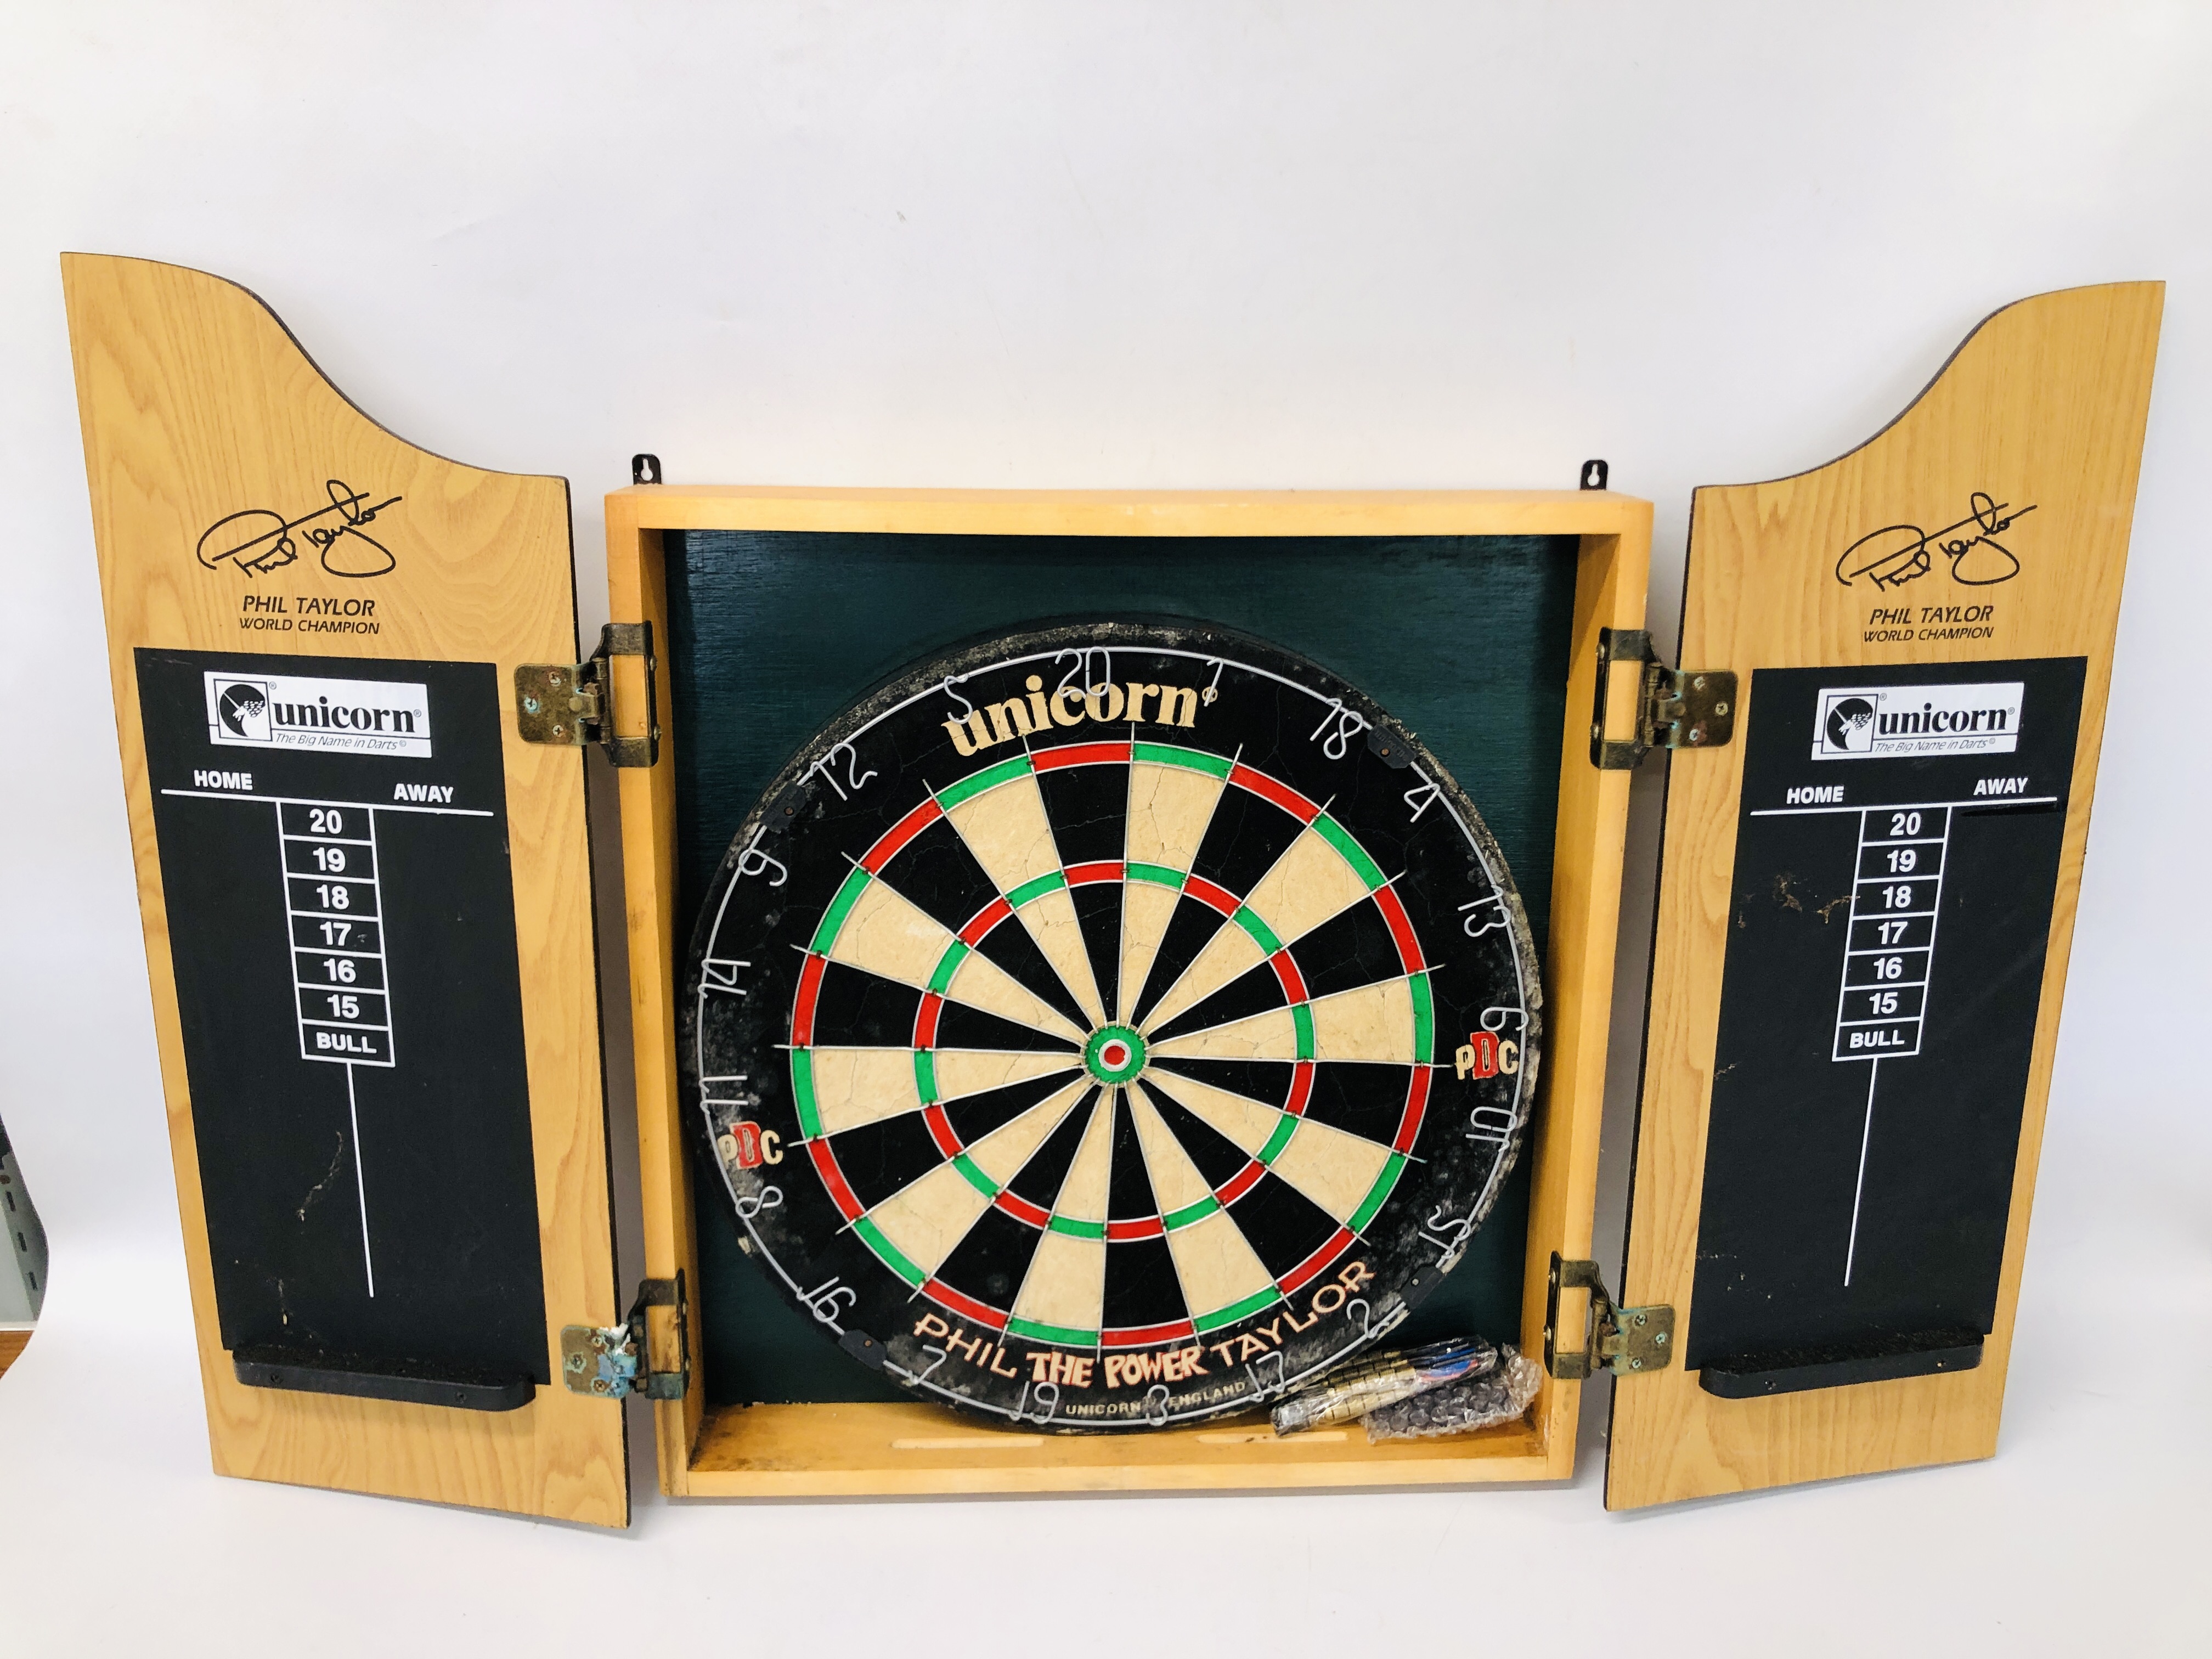 A CABINET MOUNTED UNICORN DARTBOARD BY PHIL TAYLOR.